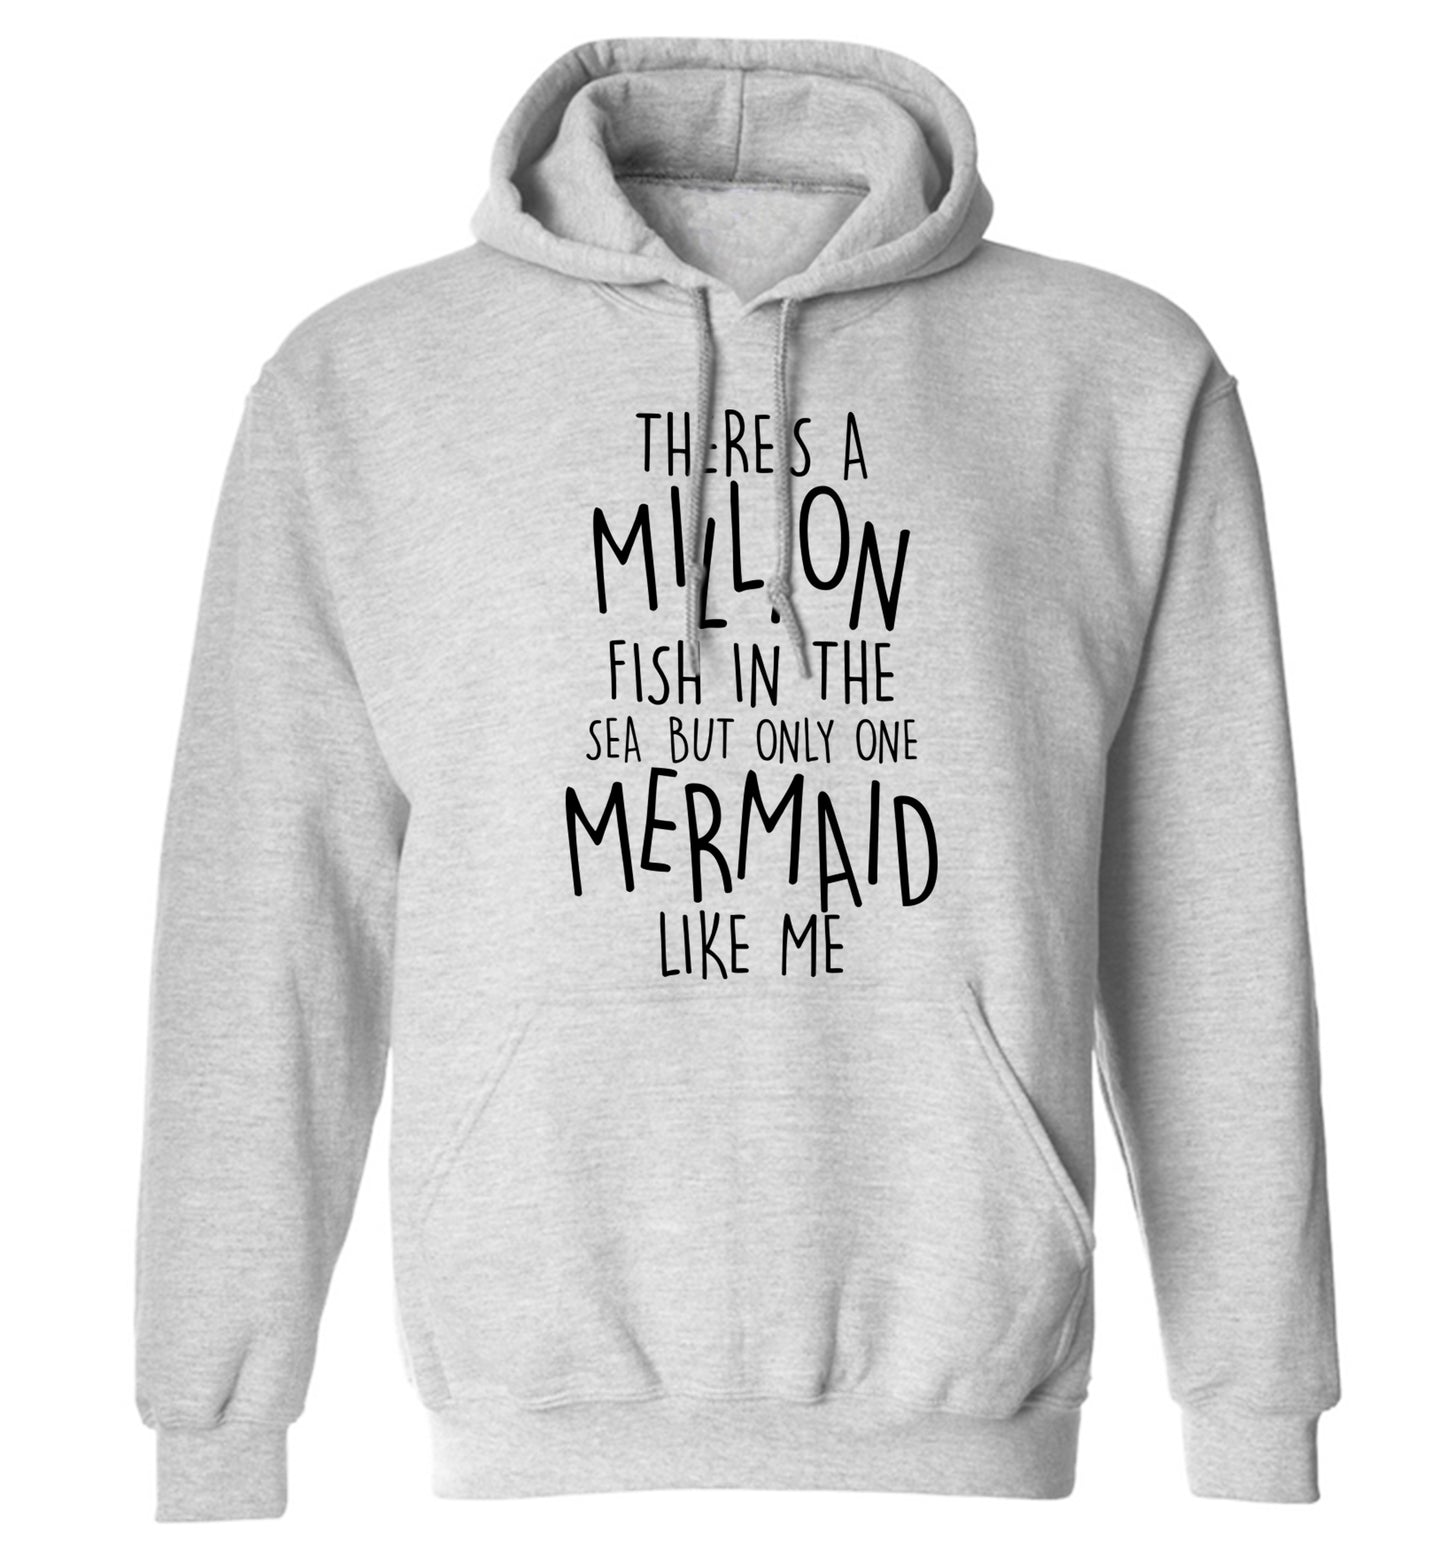 There's a million fish in the sea but only one mermaid like me adults unisex grey hoodie 2XL